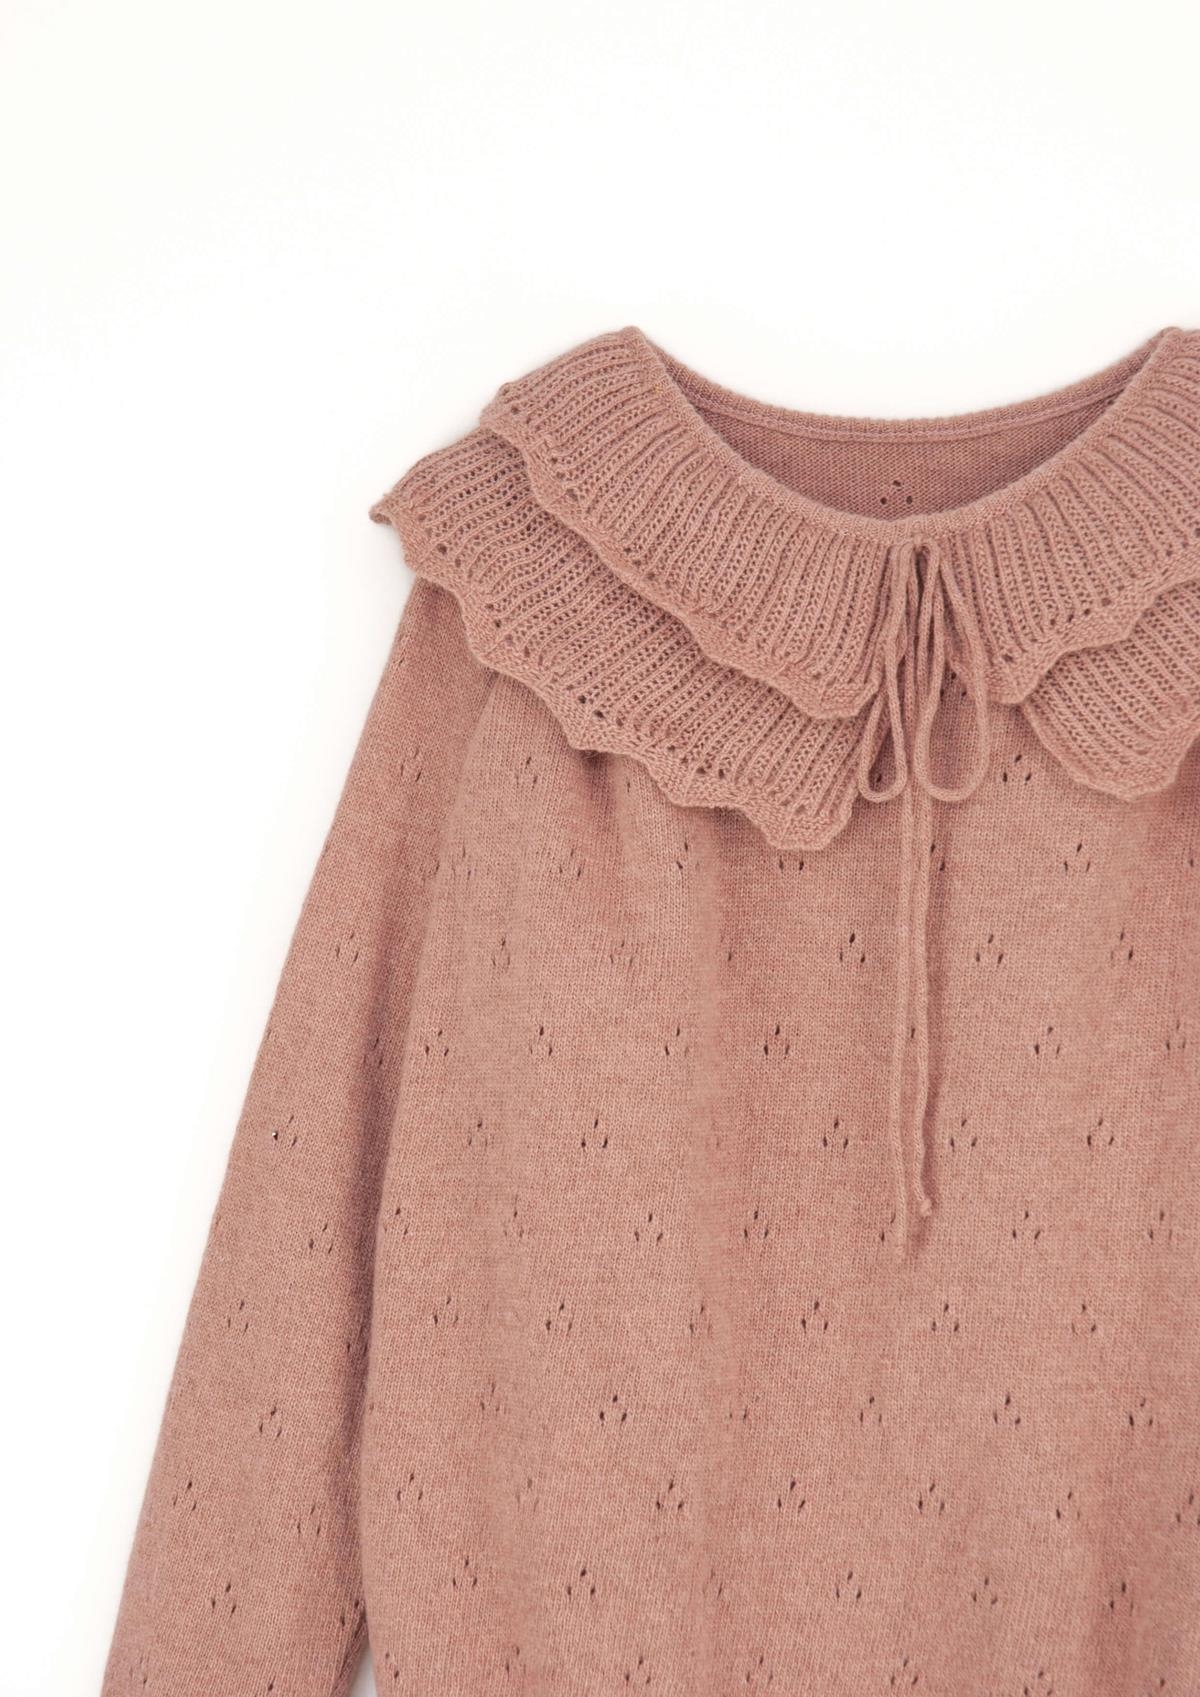 Mod.16.3 Dusty pink knitted jersey with double frill collar | AW23.24 Mod.16.3 Dusty pink knitted jersey with double frill collar